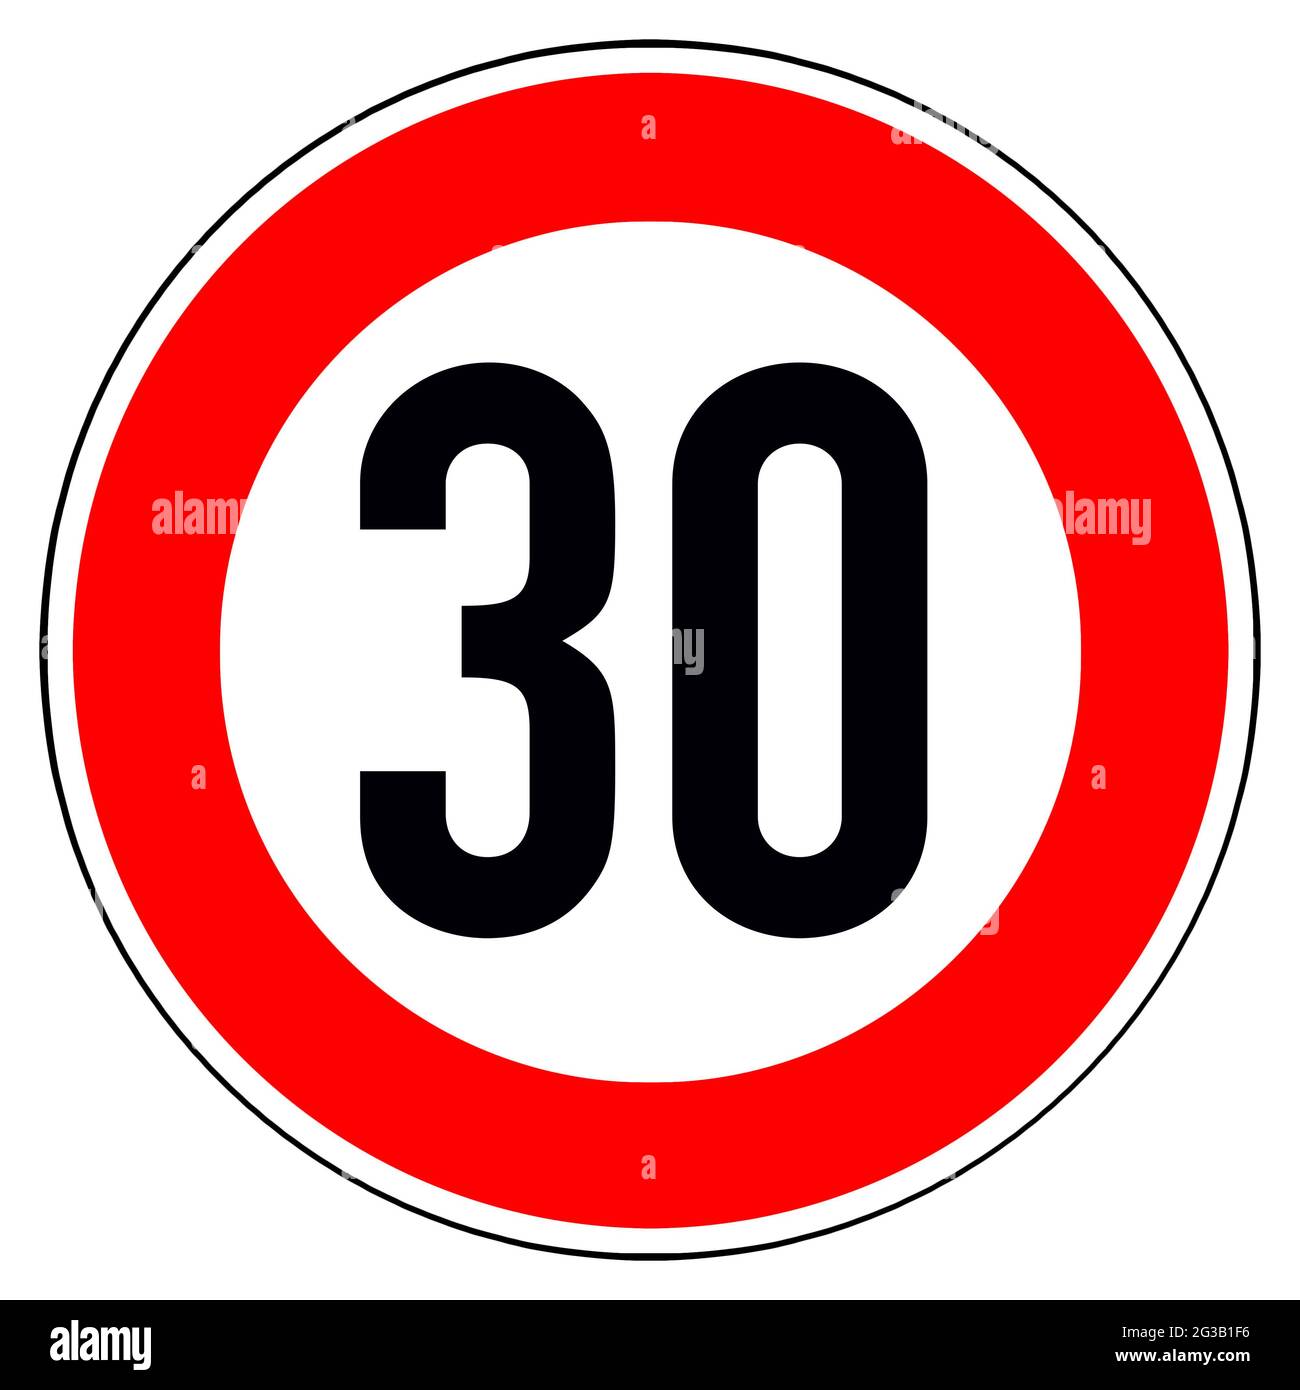 Isolated traffic sign speed limit  30 against white background Stock Photo